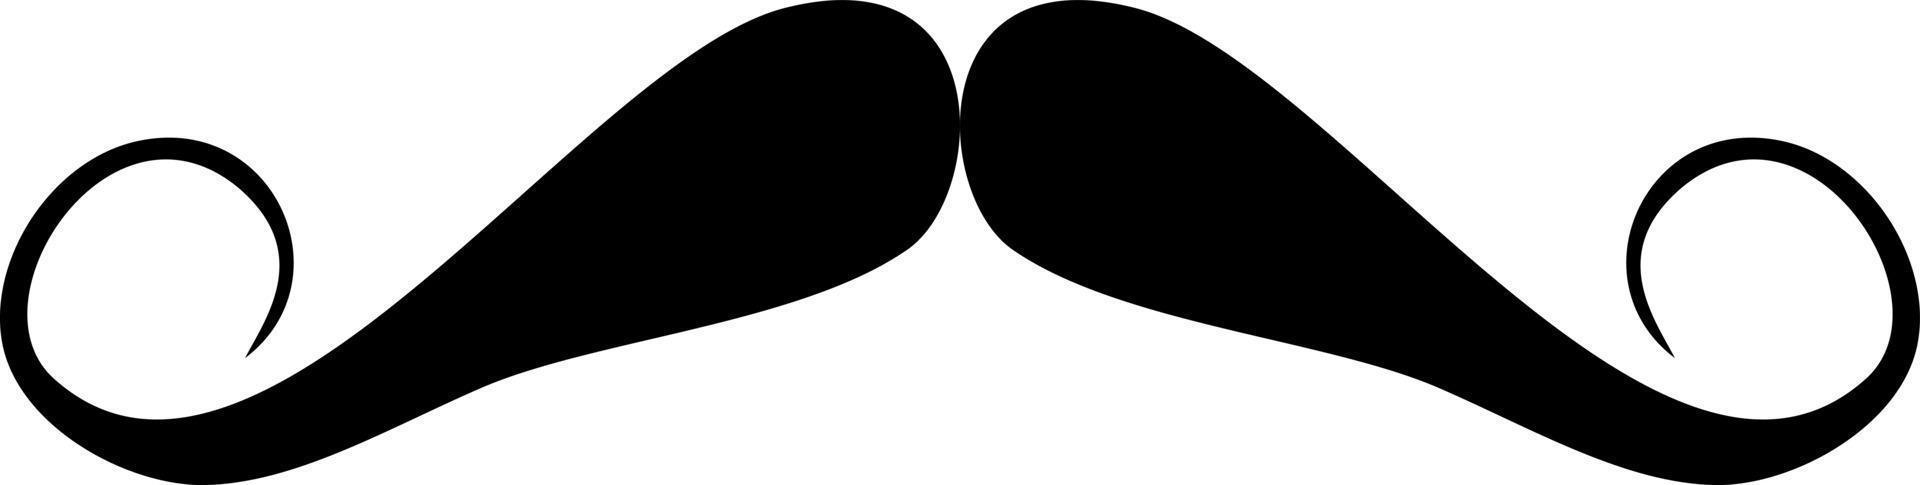 mustache icon in trendy flat style vector